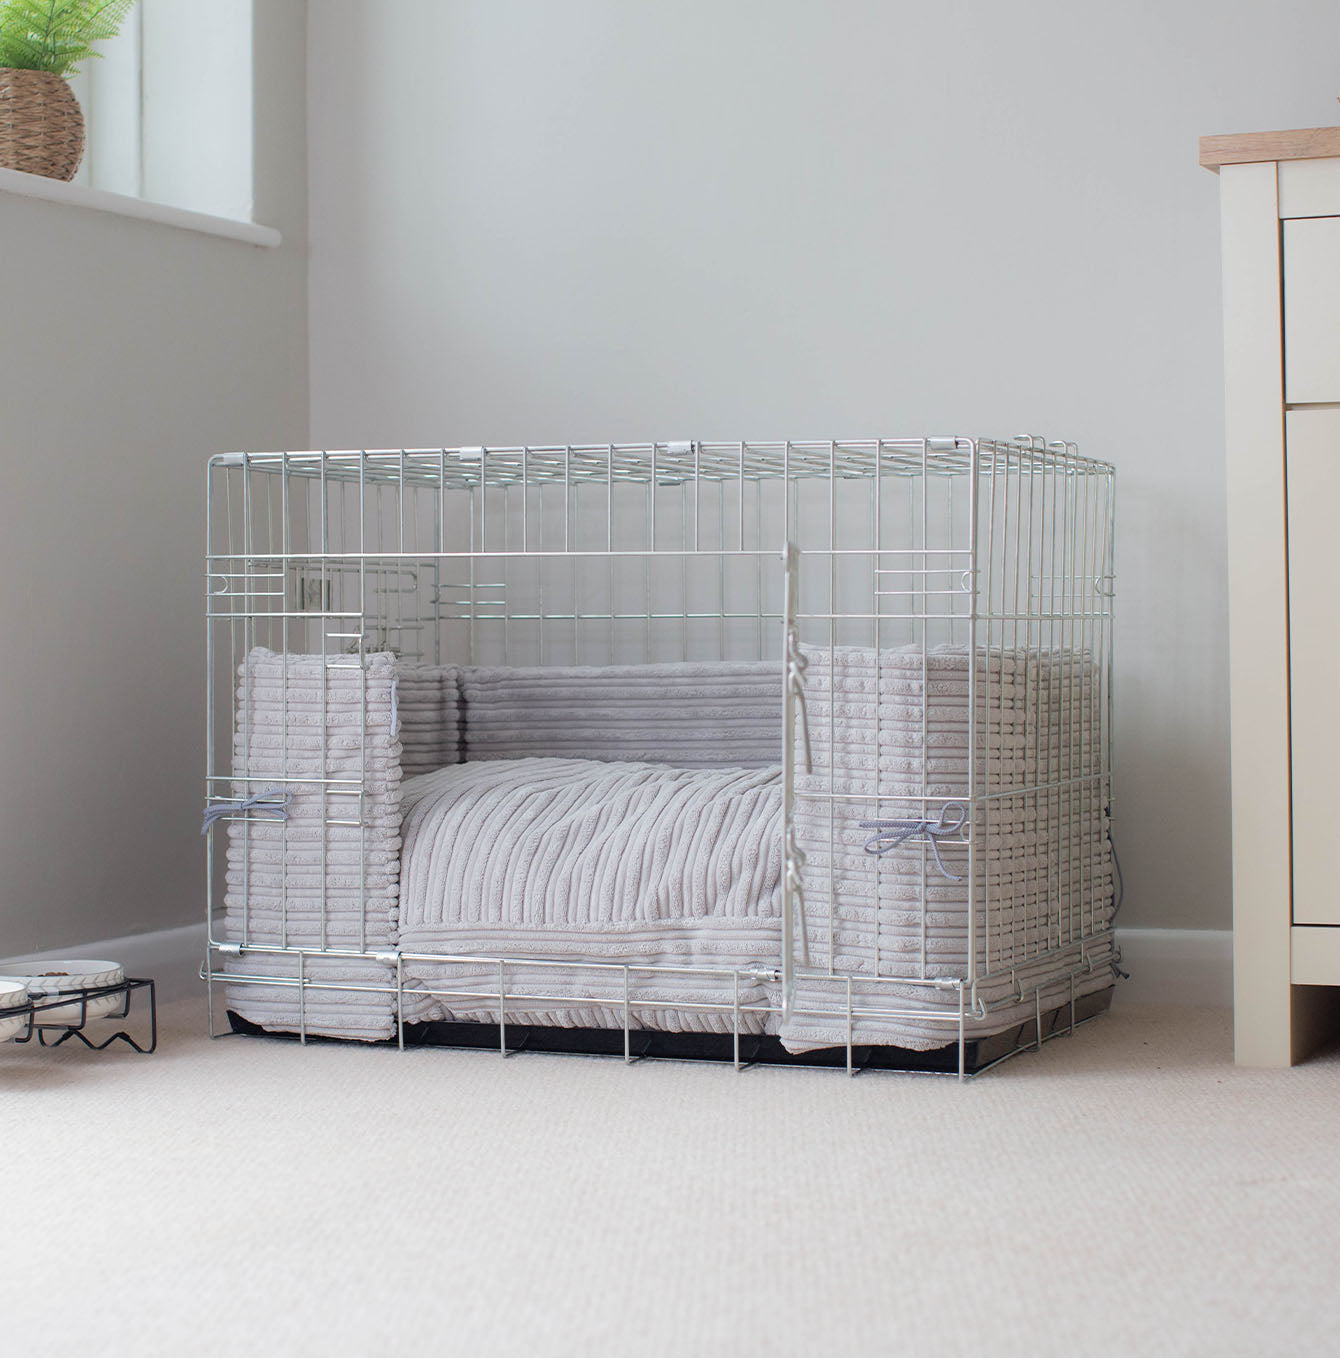 Essentials Plush Crate Full Bumper in Light Grey by Lords & Labradors